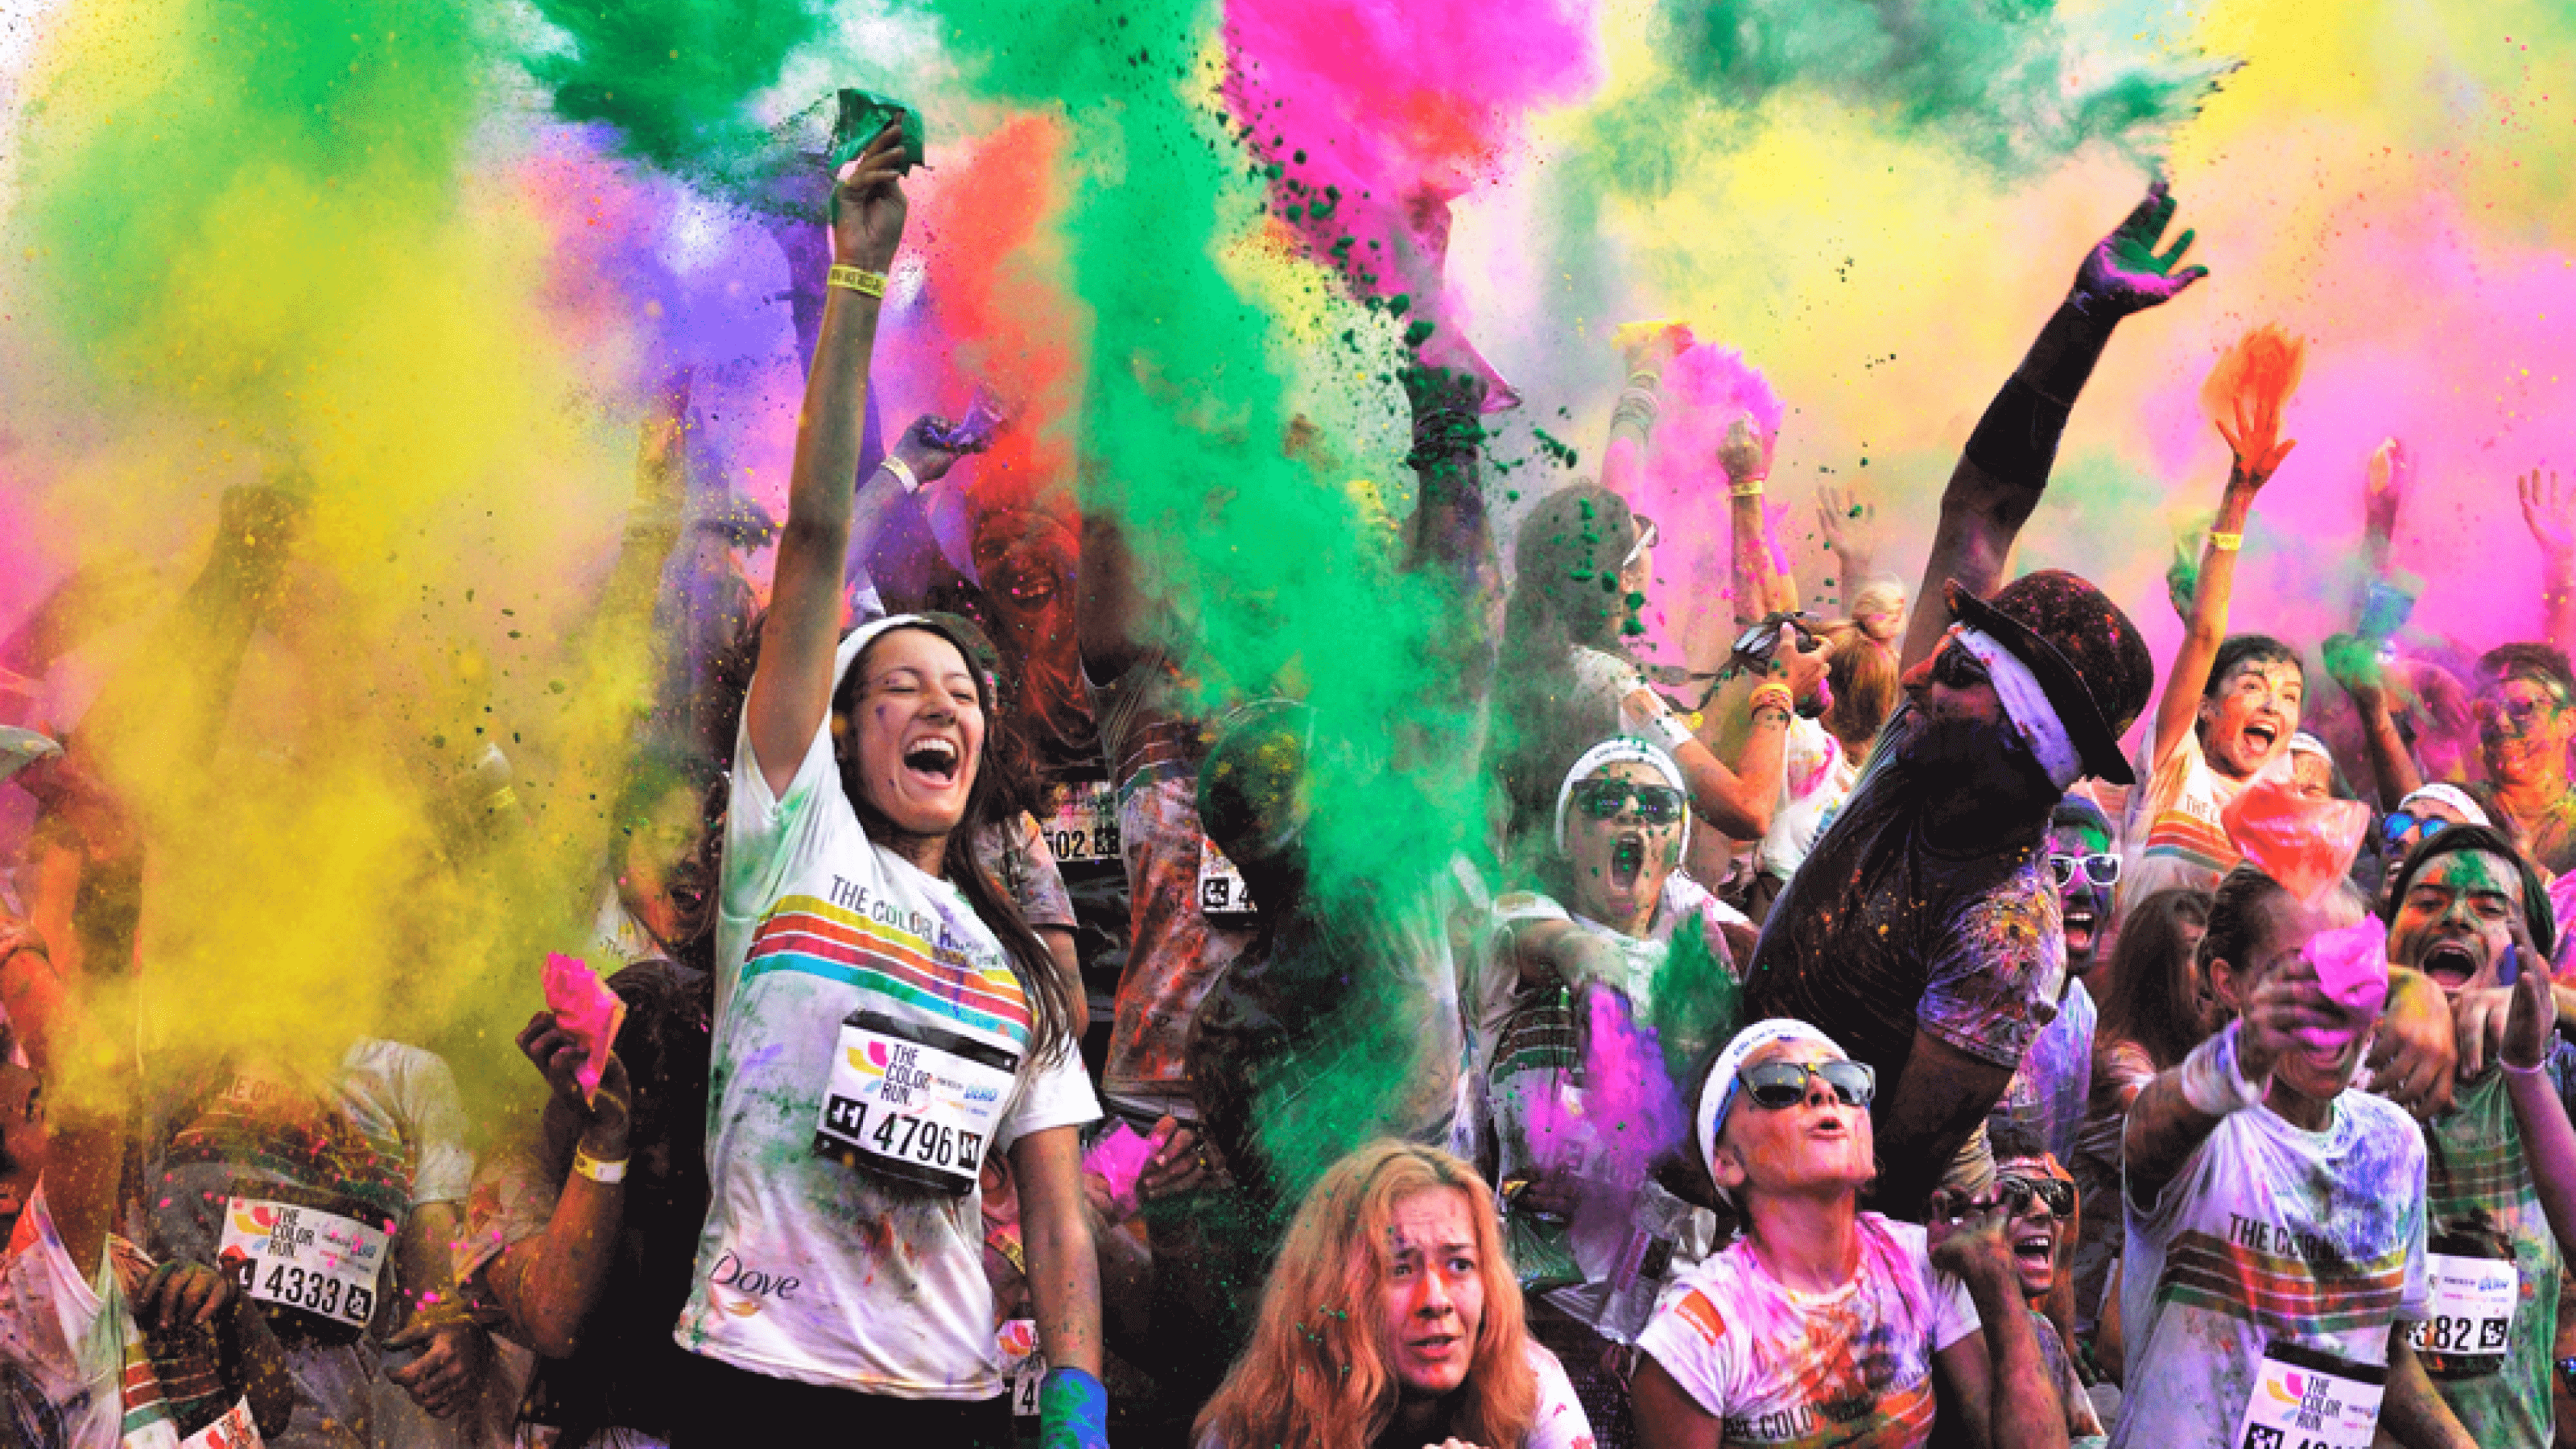 Runners celebrate completing a color run